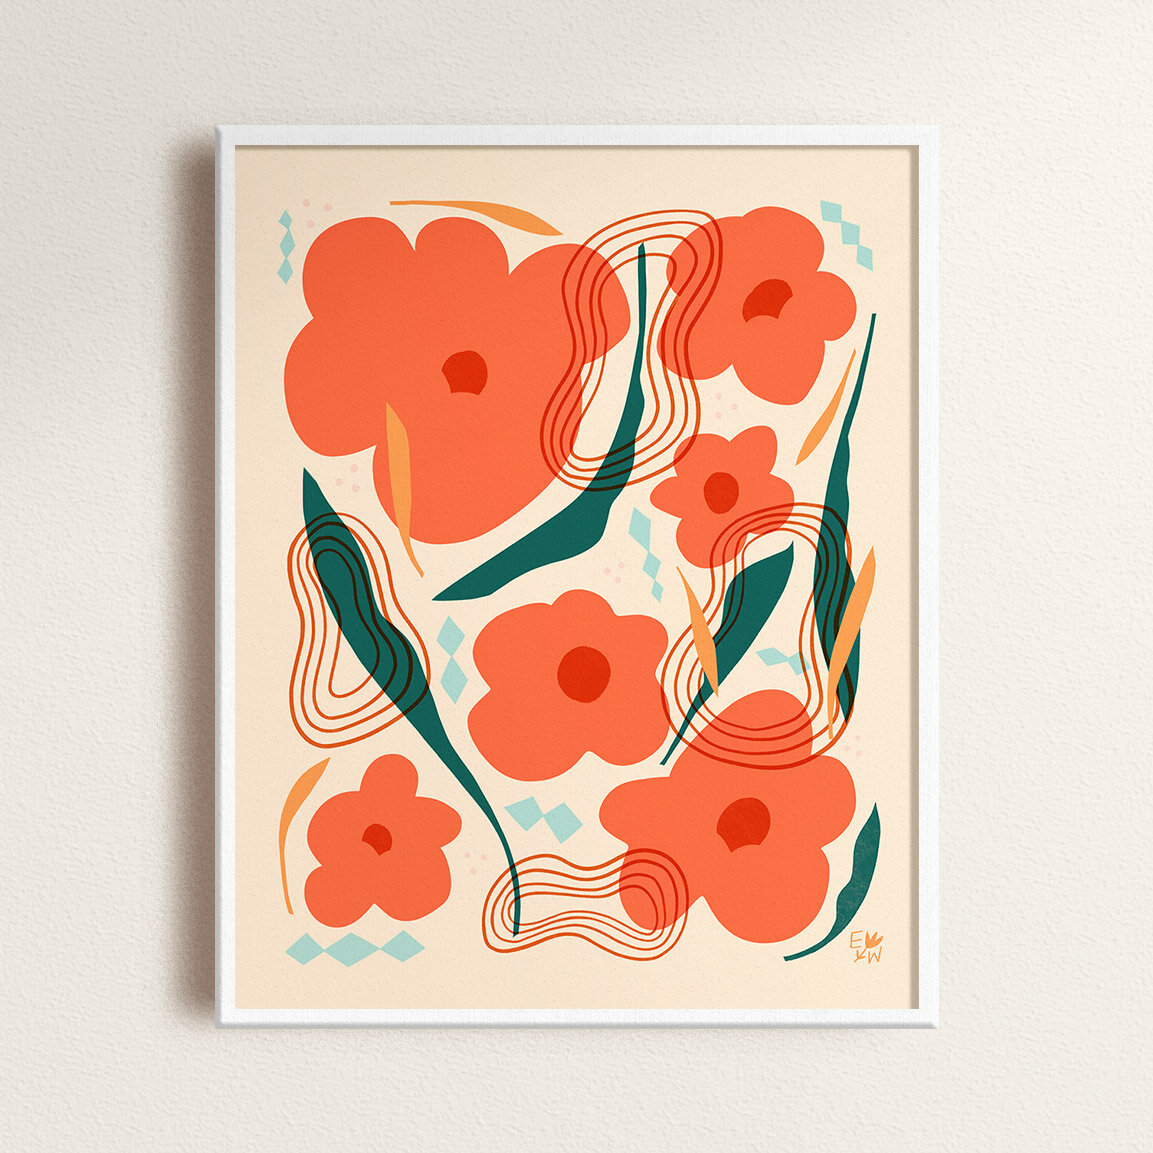 Erin Wallace Illustration | Wobbly Blooms print